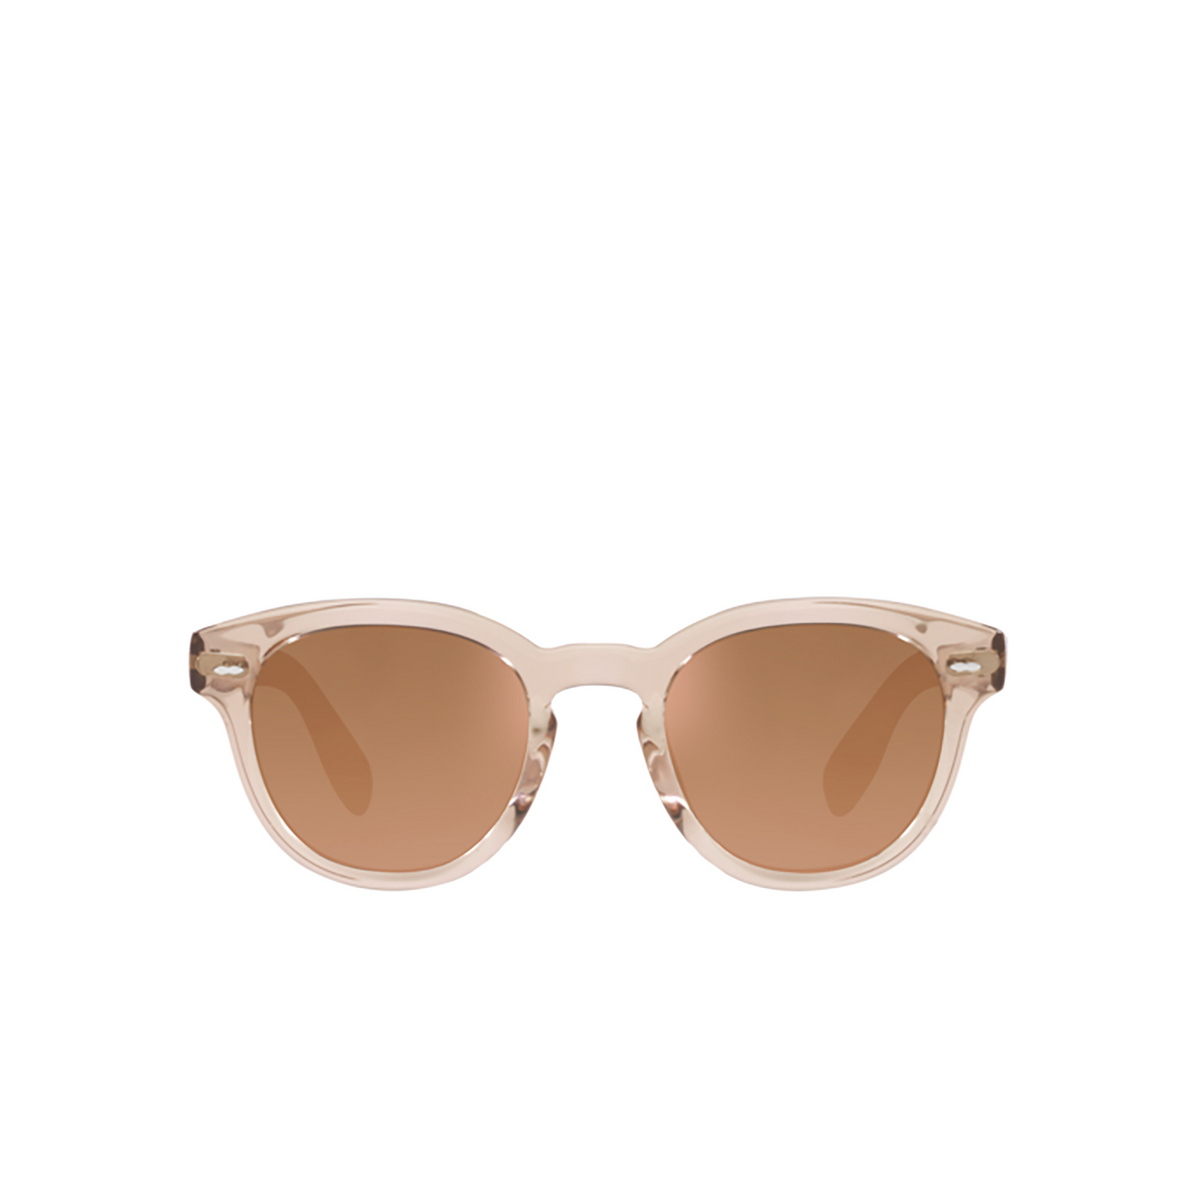 Oliver Peoples CARY GRANT Sunglasses 147142 Blush - front view